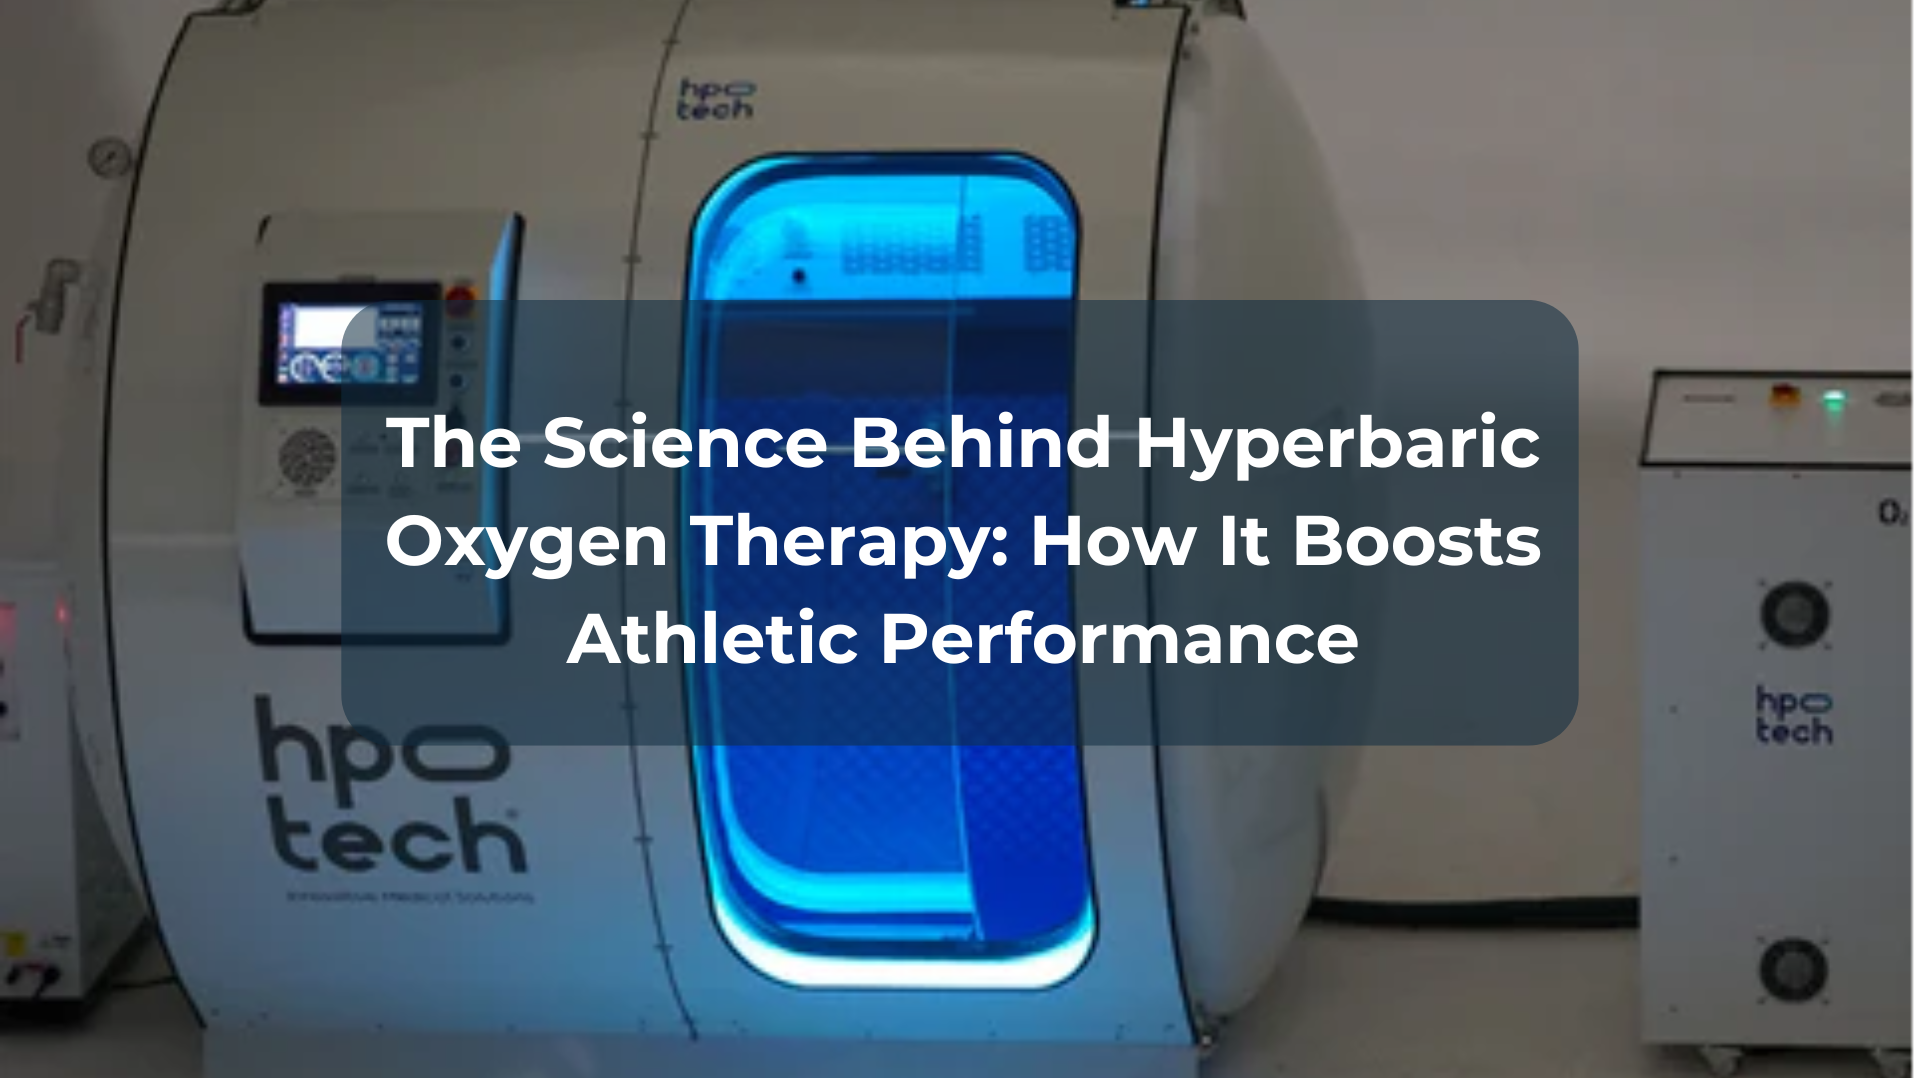 The Science Behind Hyperbaric Oxygen Therapy: How It Boosts Performance